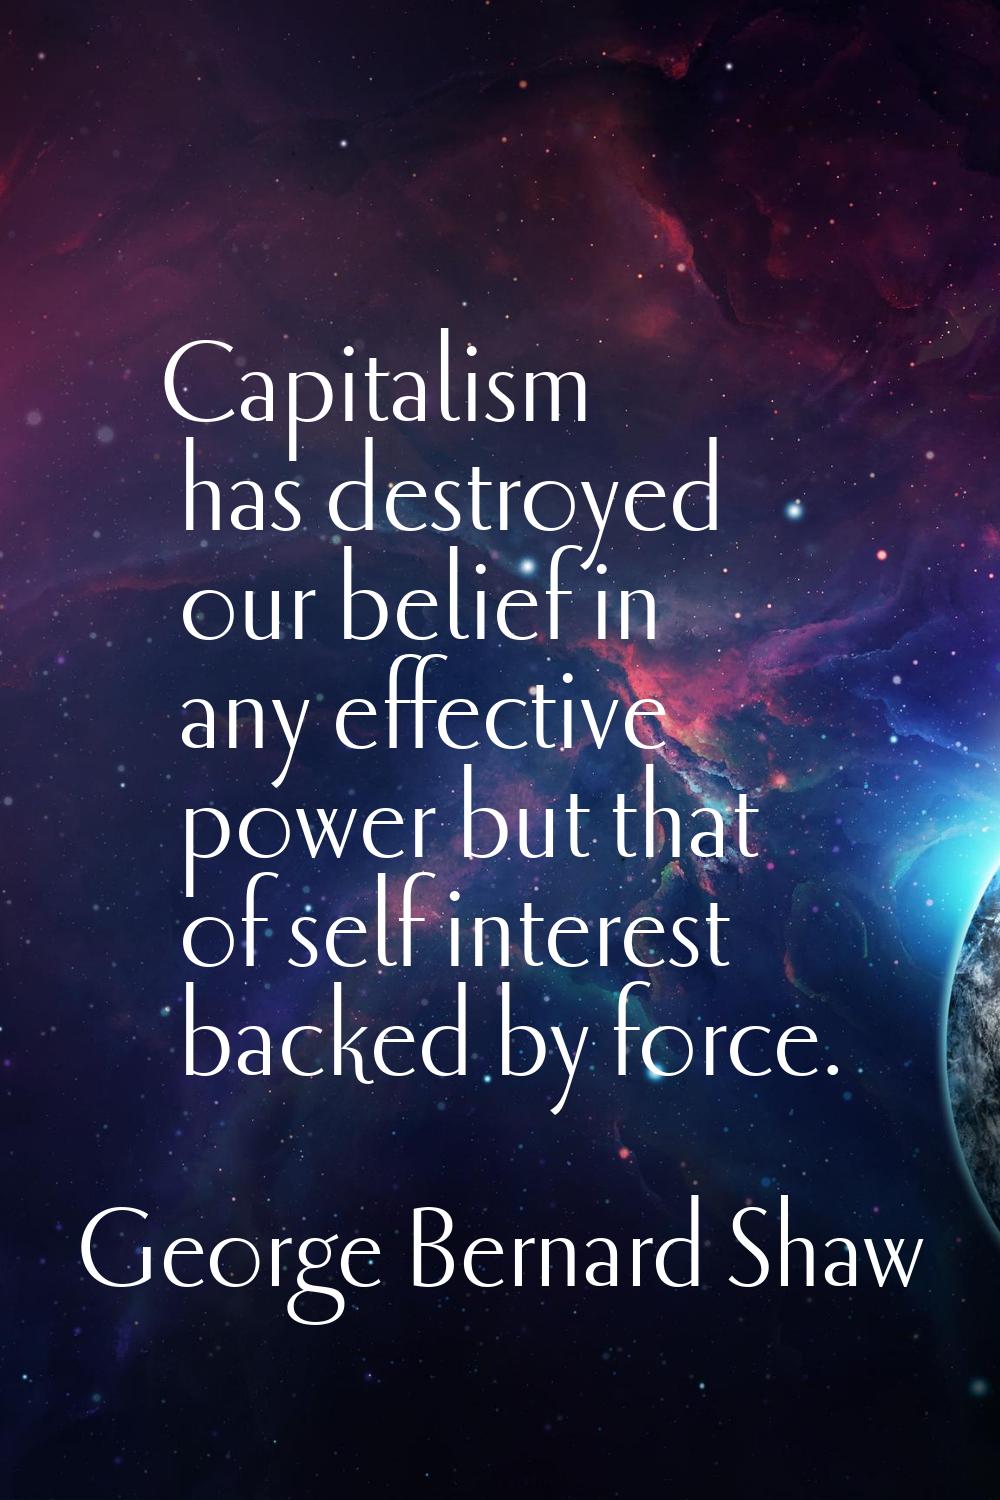 Capitalism has destroyed our belief in any effective power but that of self interest backed by forc